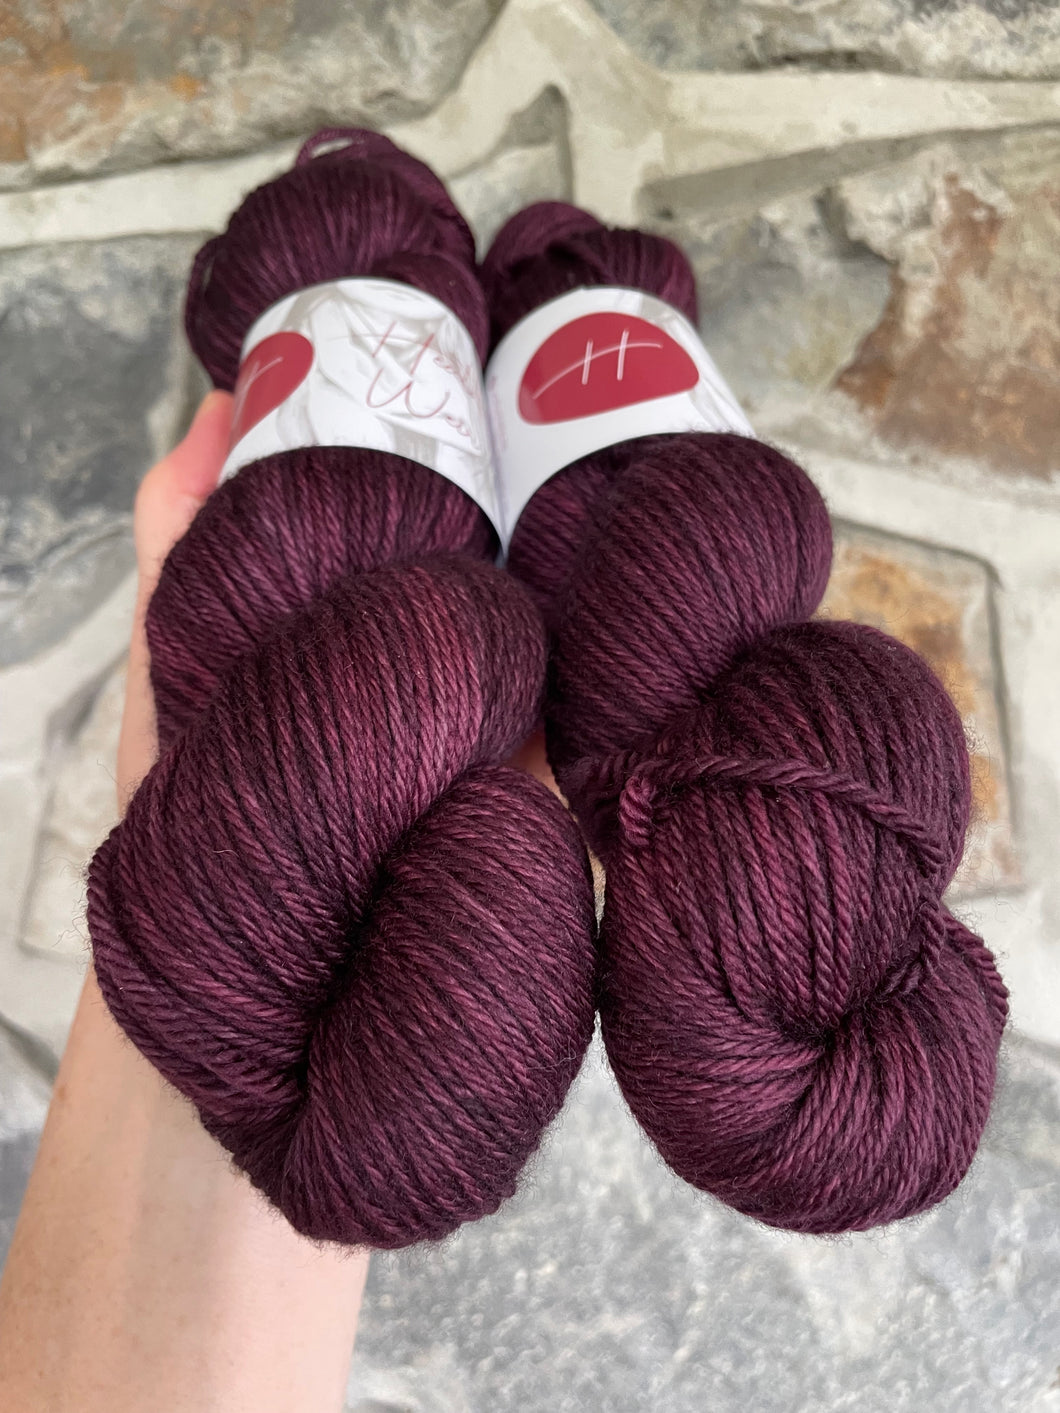 8ply Merino 'Ace of Cups'